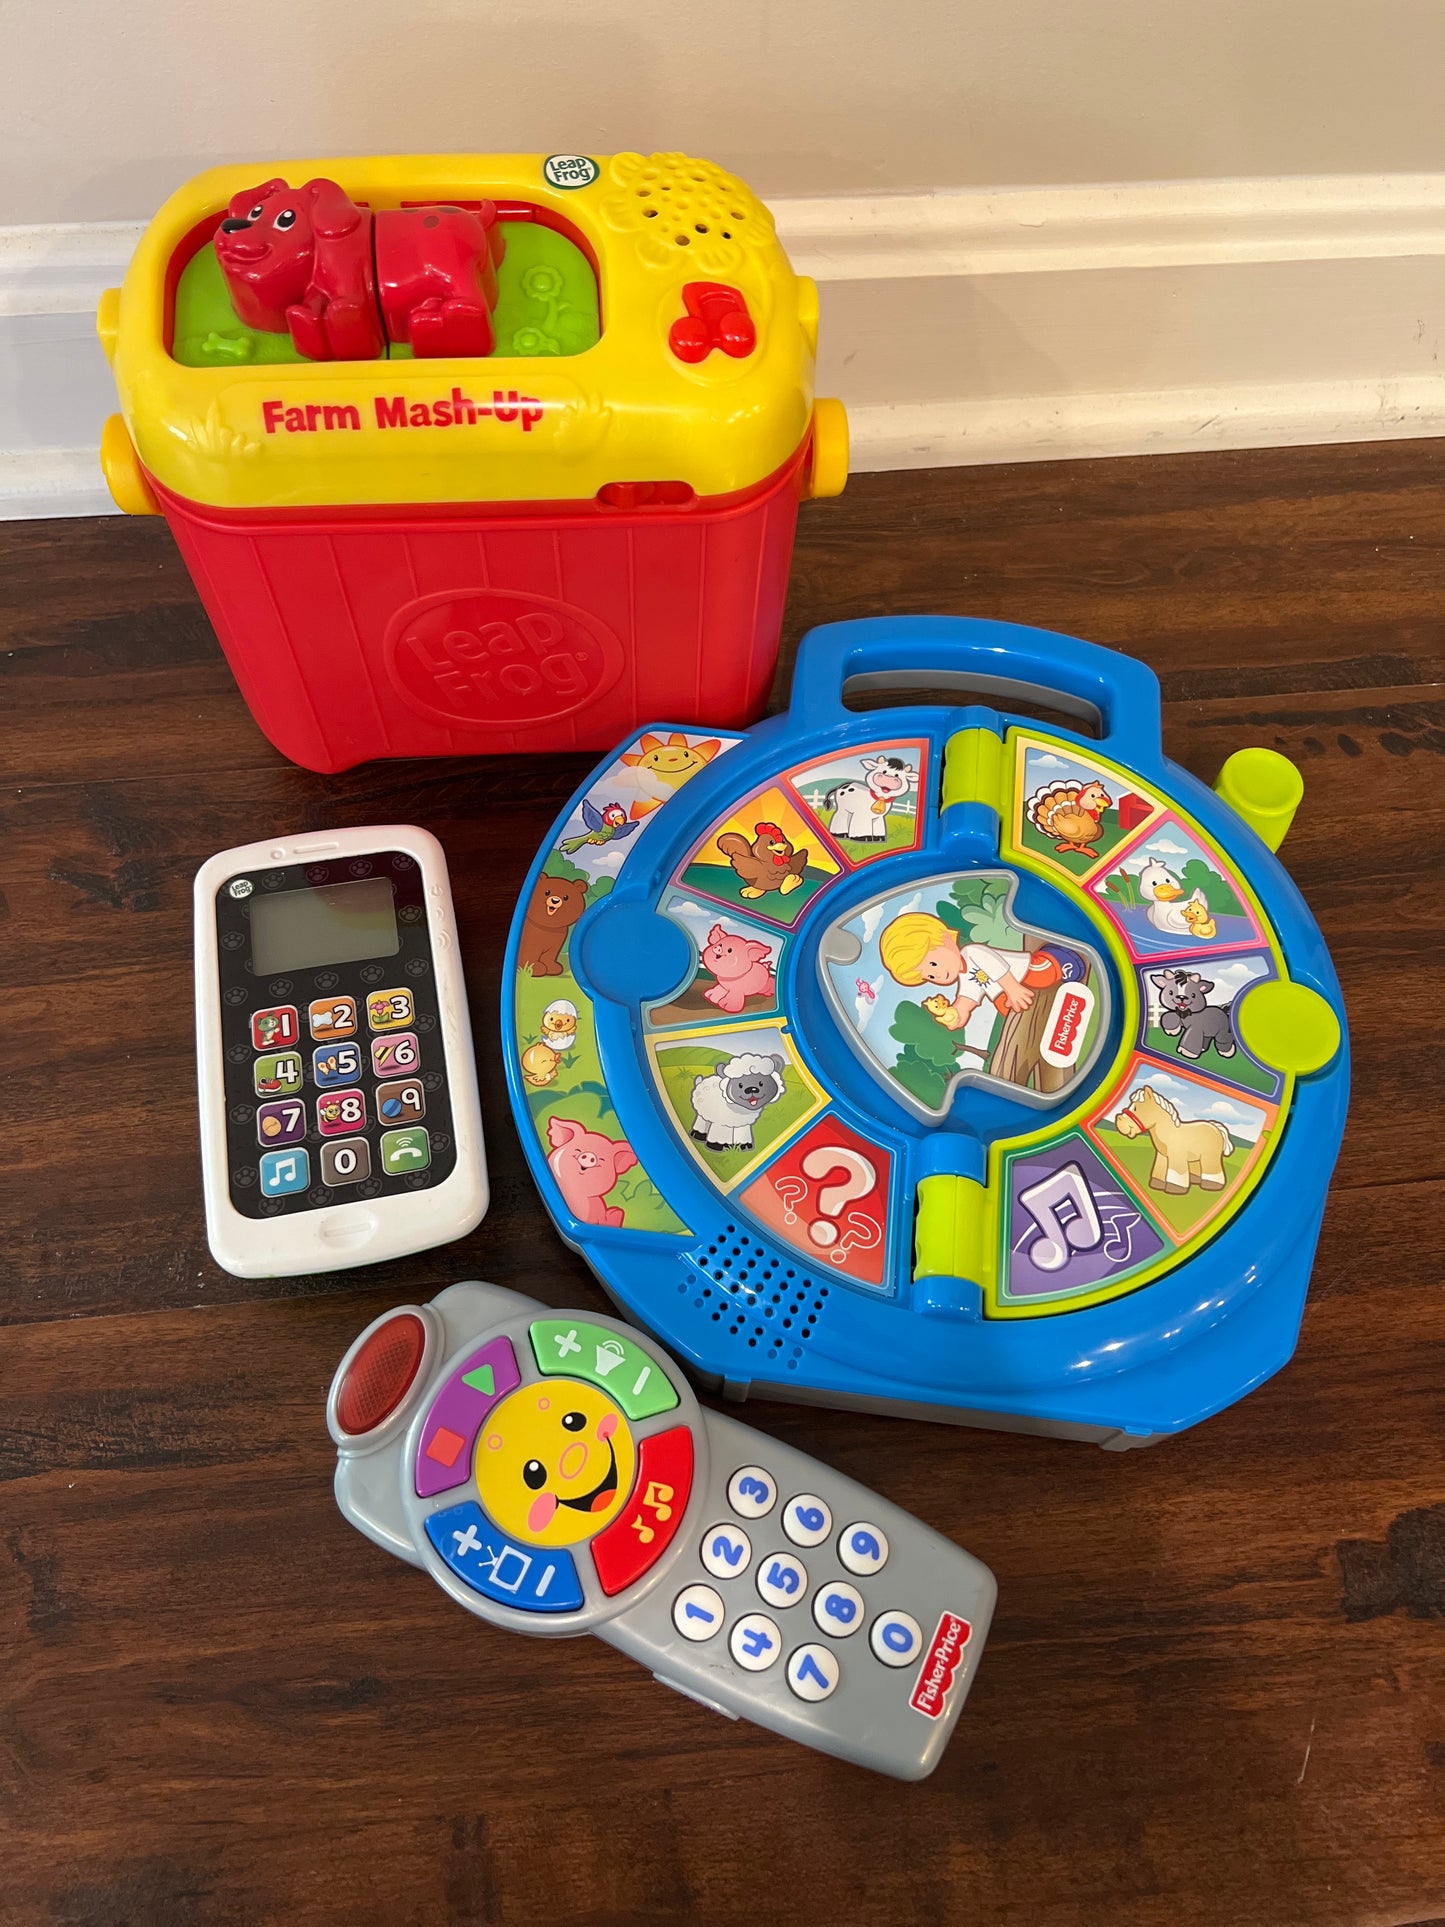 Leap Frog Farm Mash-Up, See n Say, phone and remote control